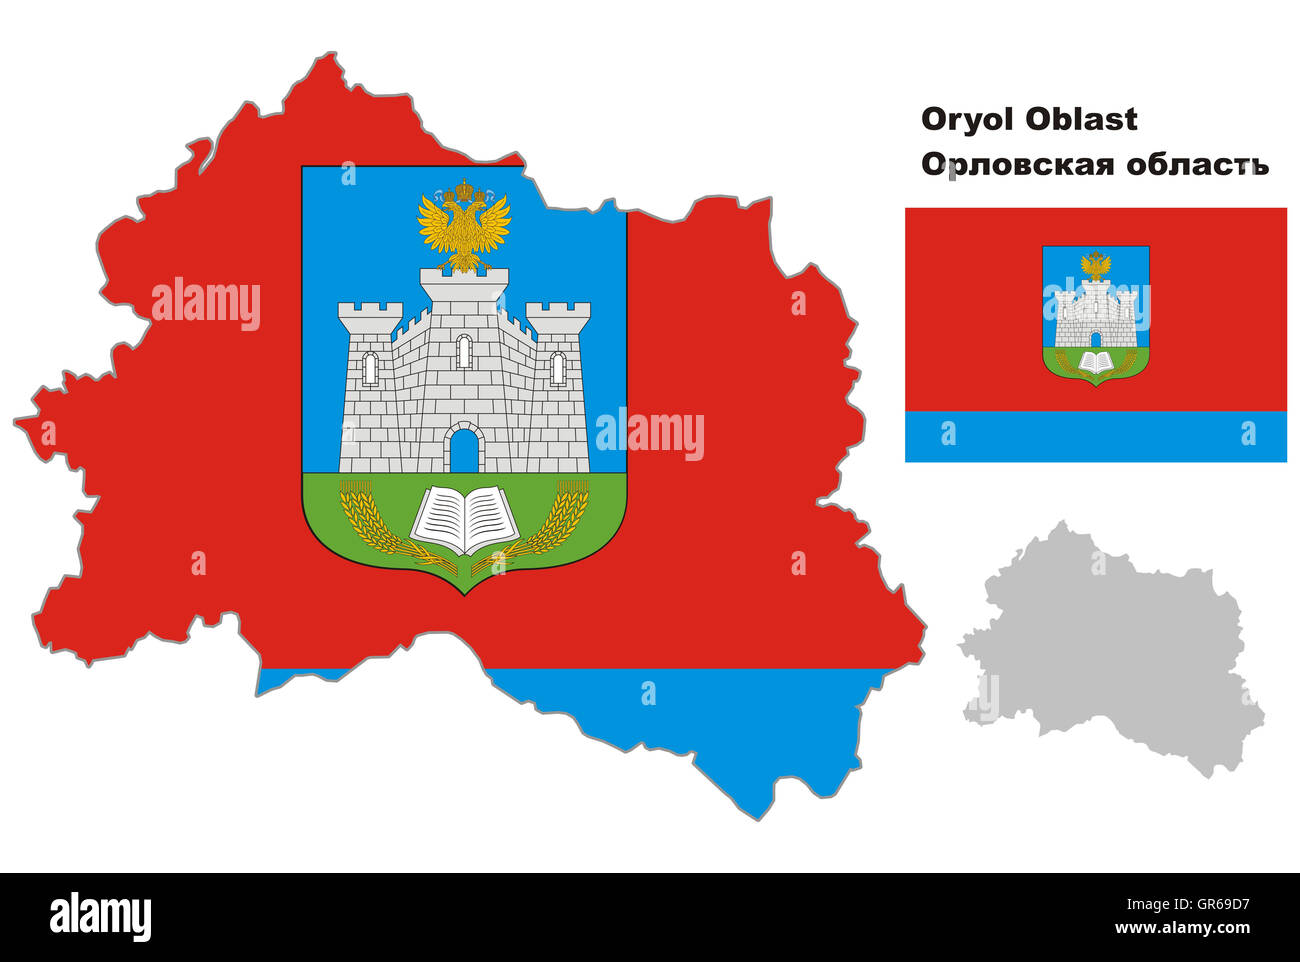 Outline map of Oryol Oblast with flag. Regions of Russia. Vector illustration. Stock Photo